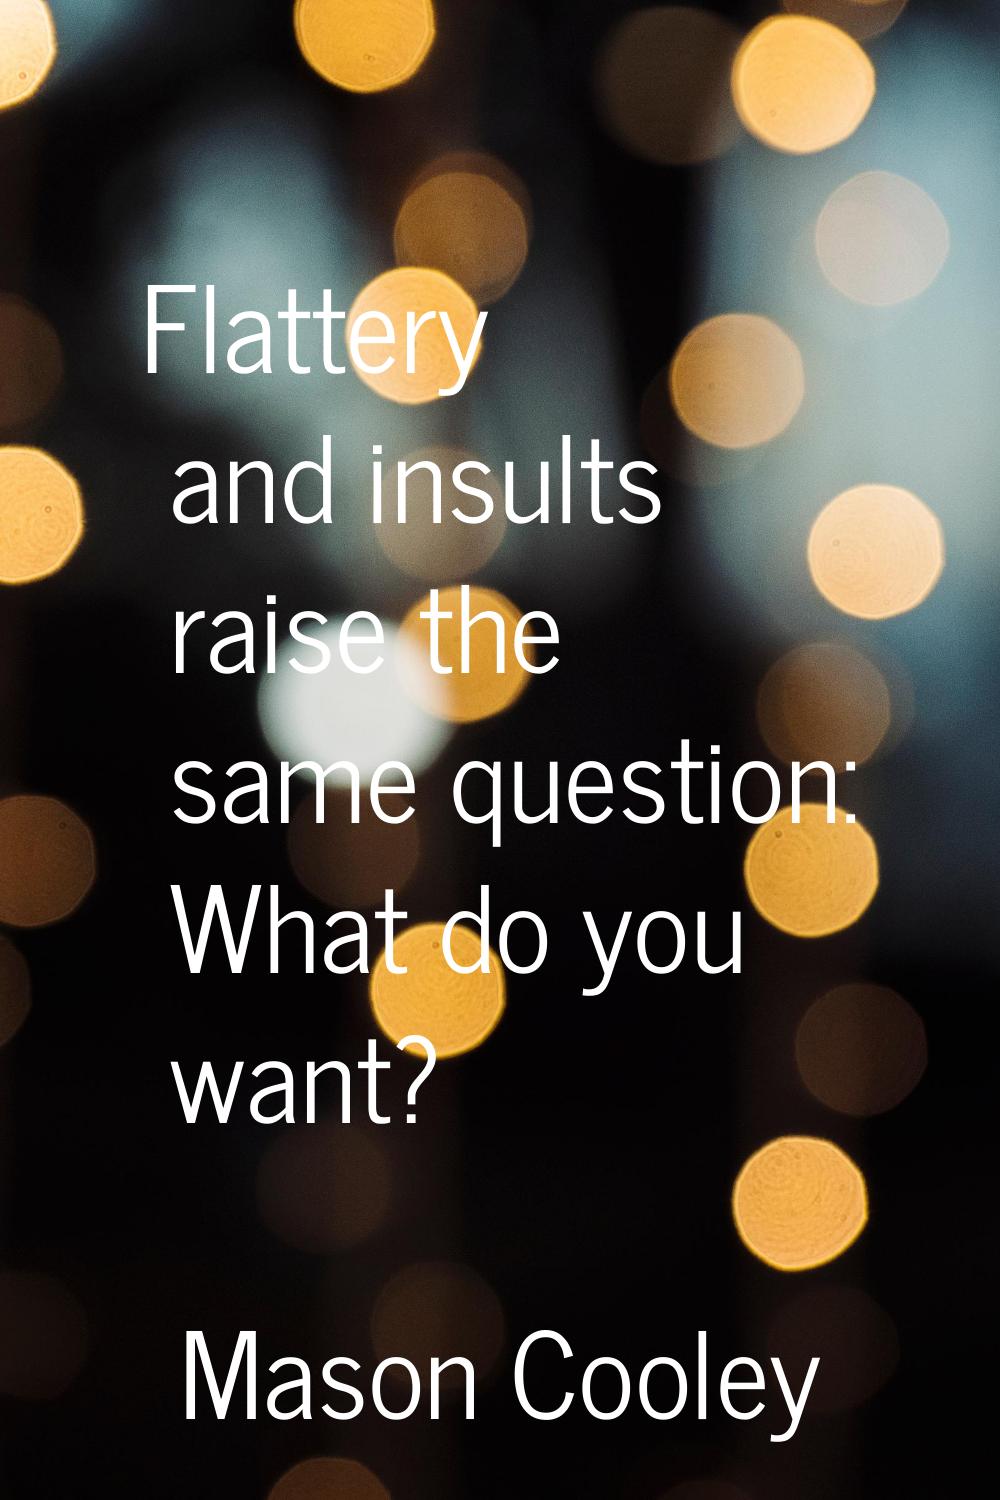 Flattery and insults raise the same question: What do you want?